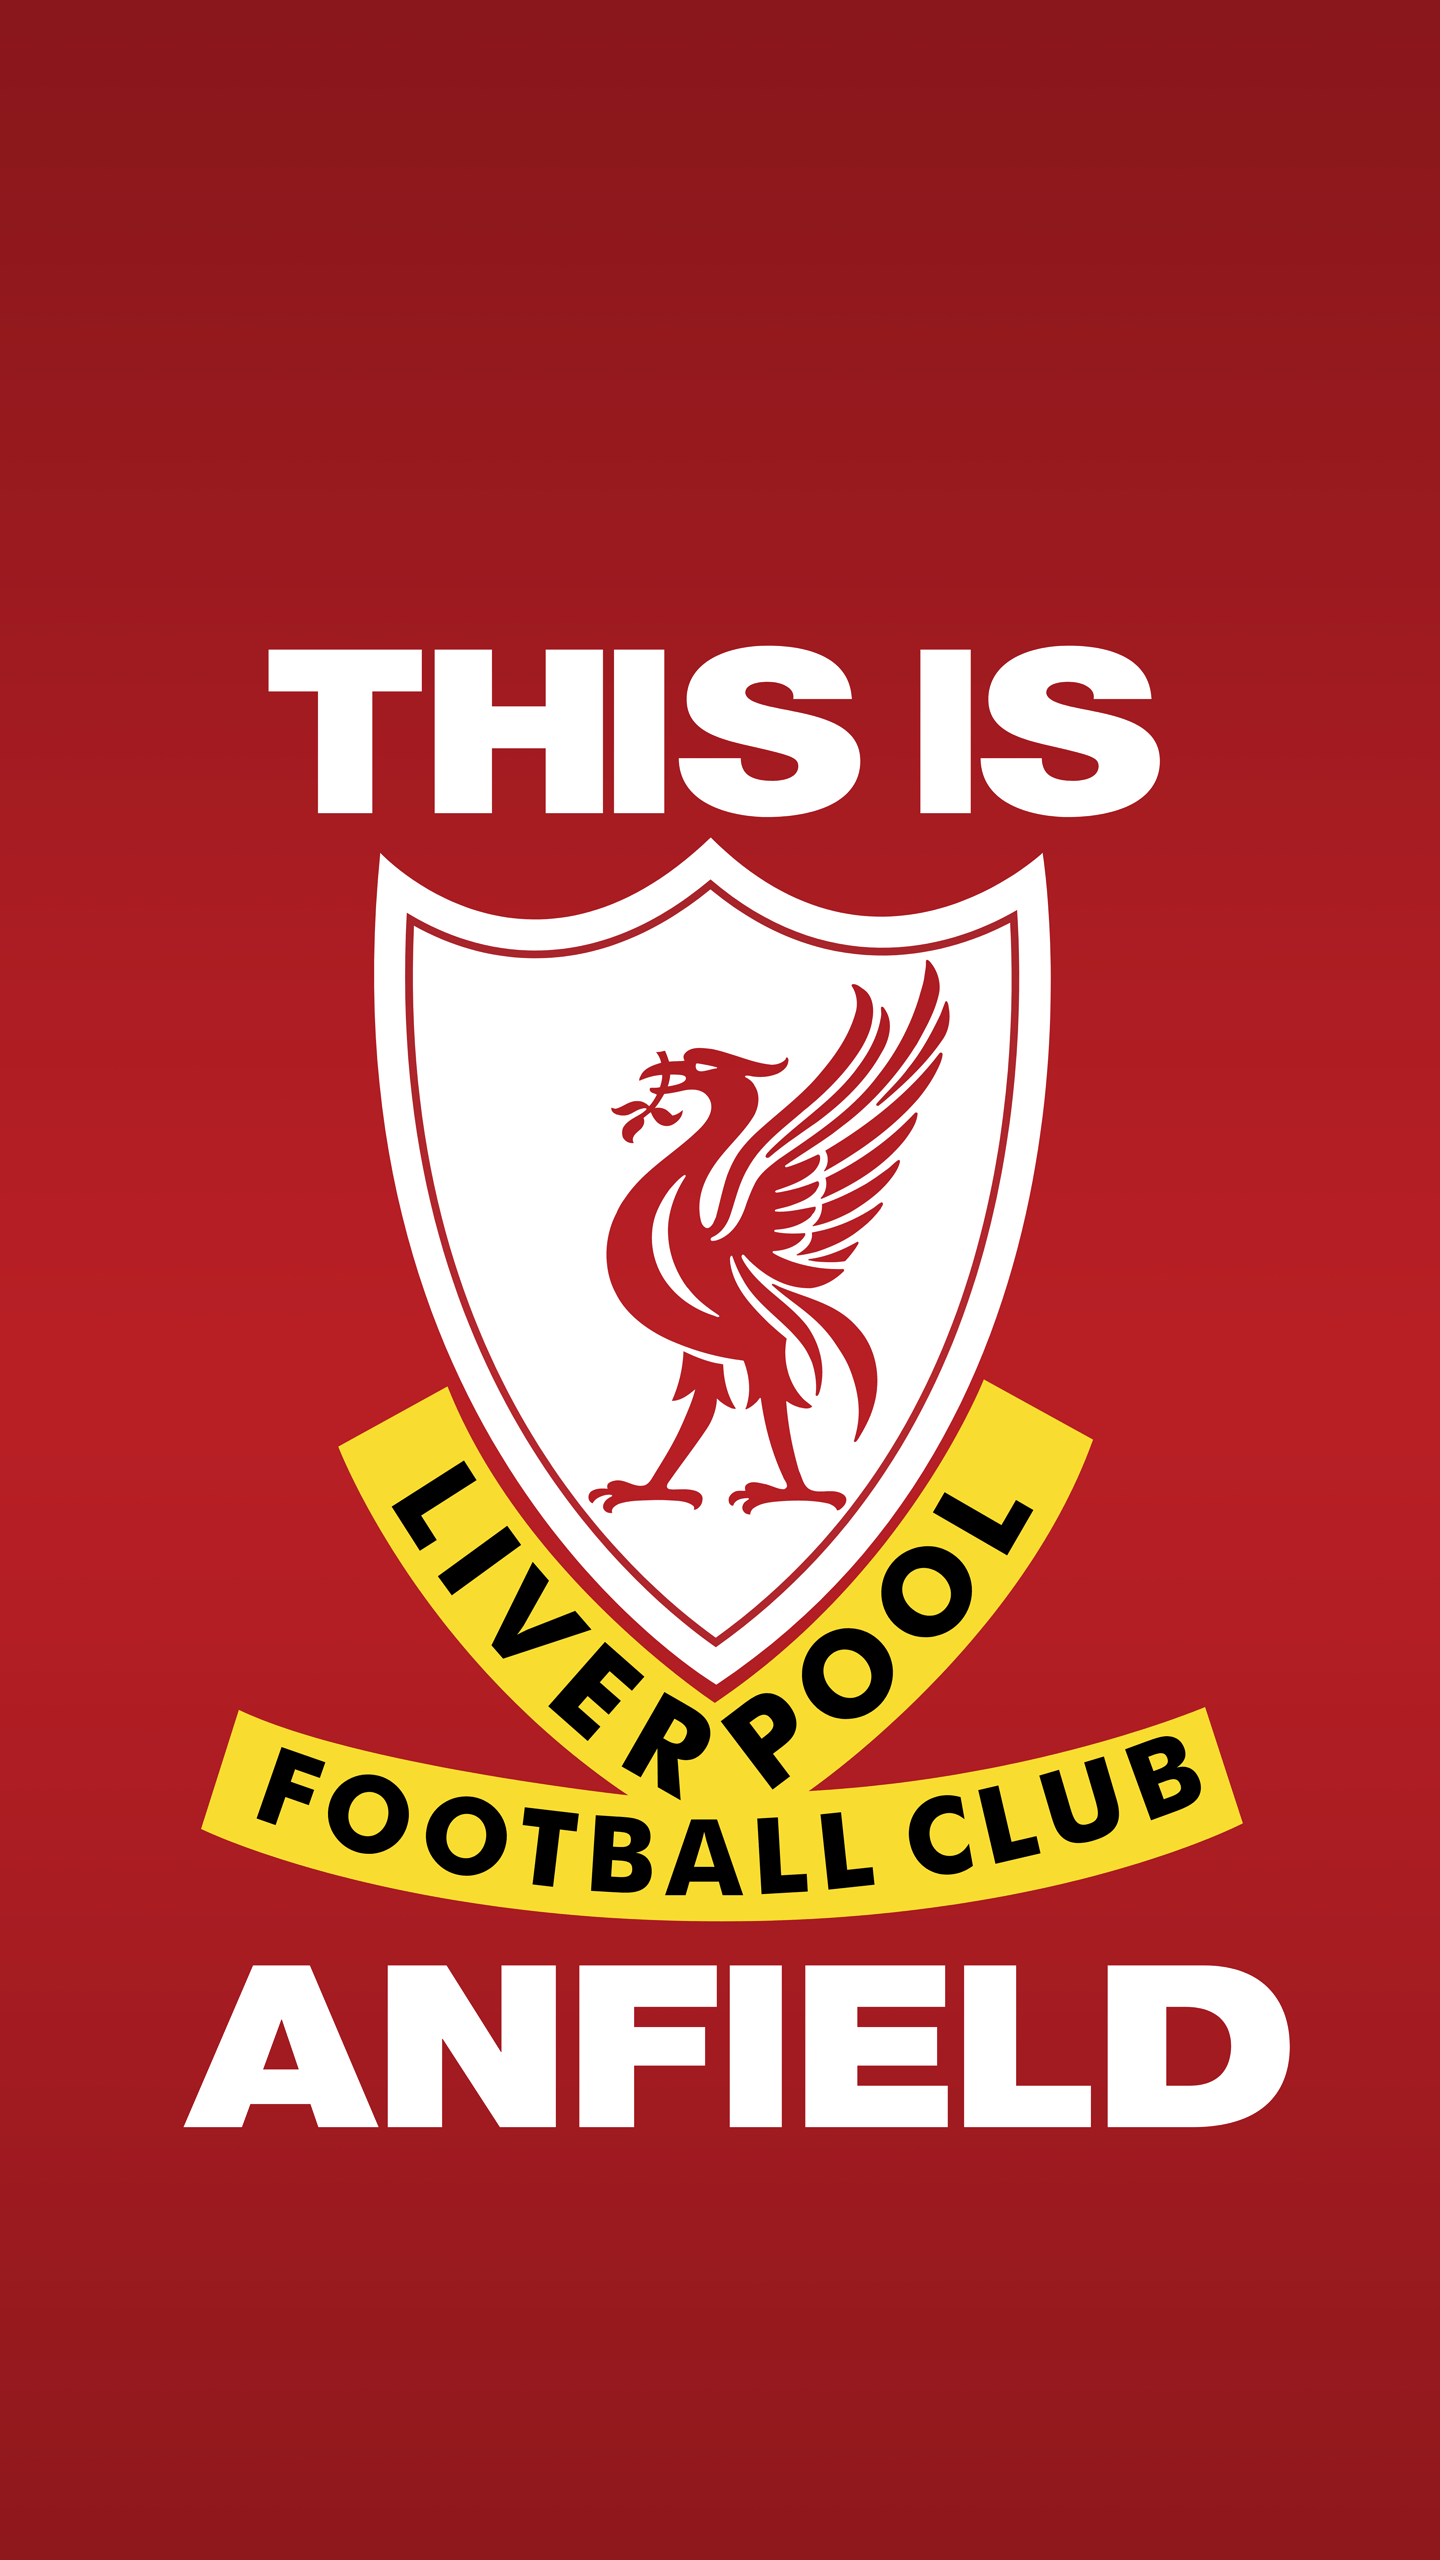 Liverpool Wallpaper 4K 2021 : Download, share or upload your own one